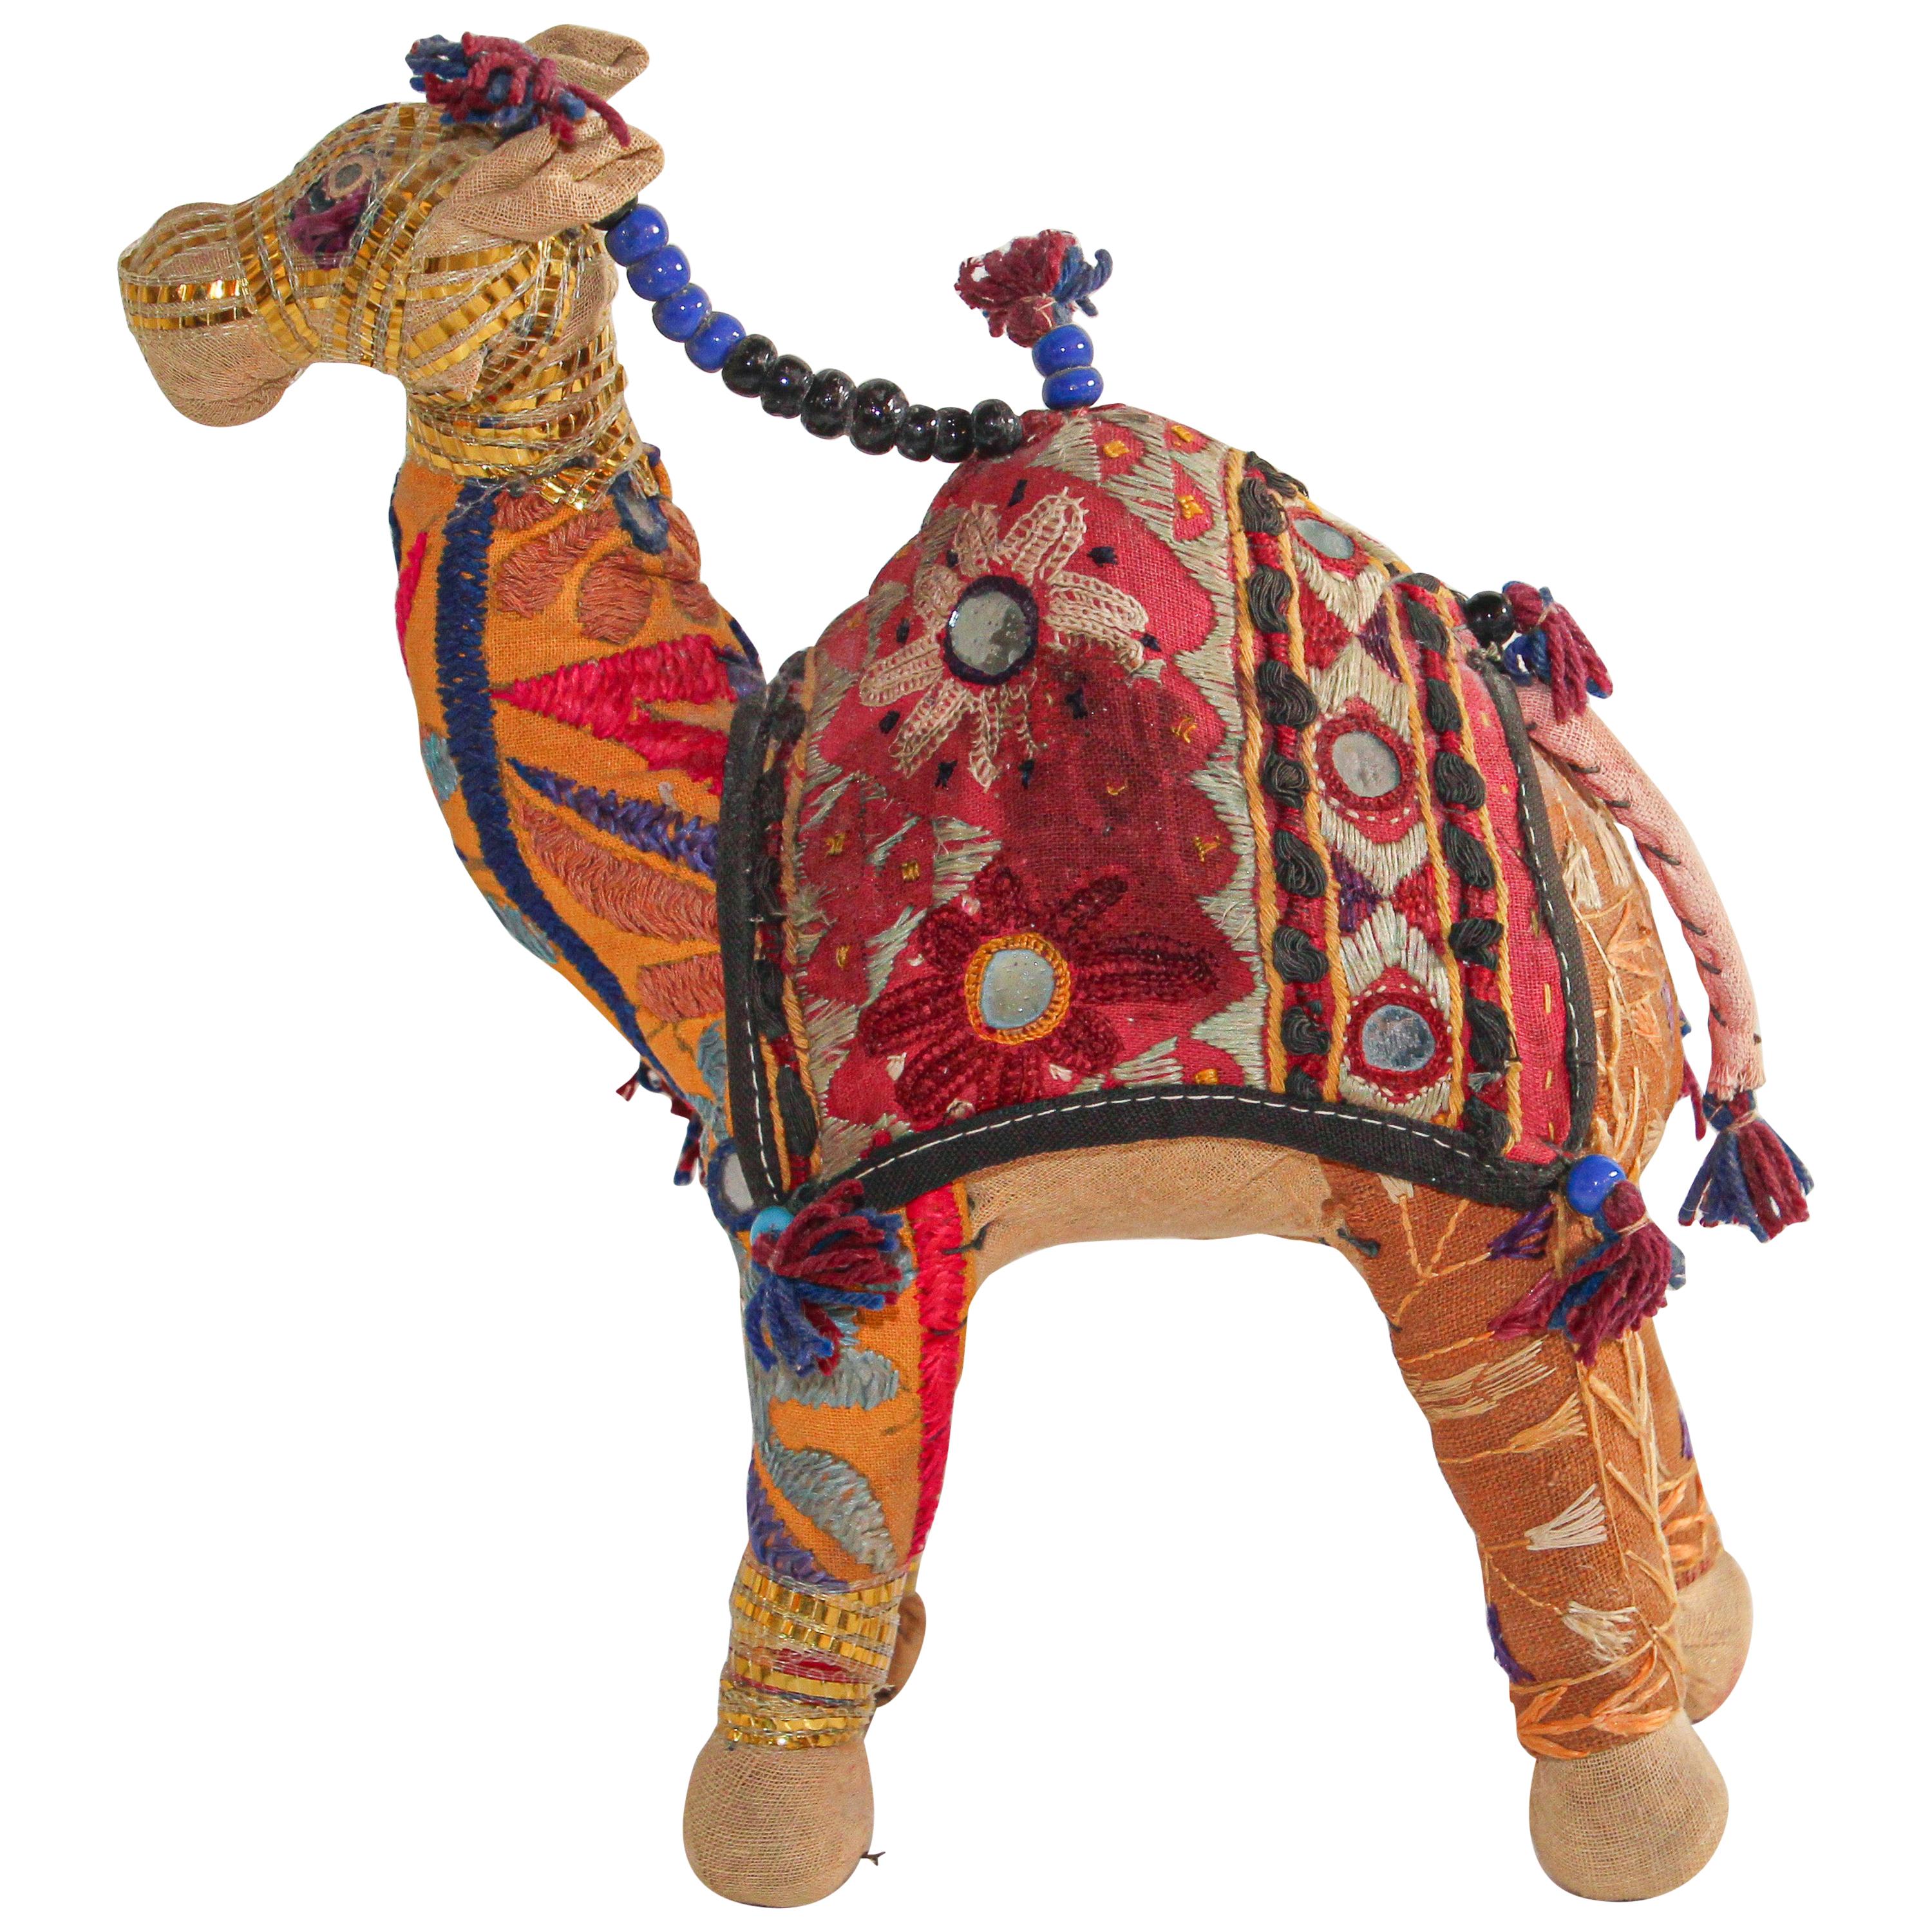 Handcrafted Raj Vintage Stuffed Cotton Embroidered Camel Toy, India, 1950